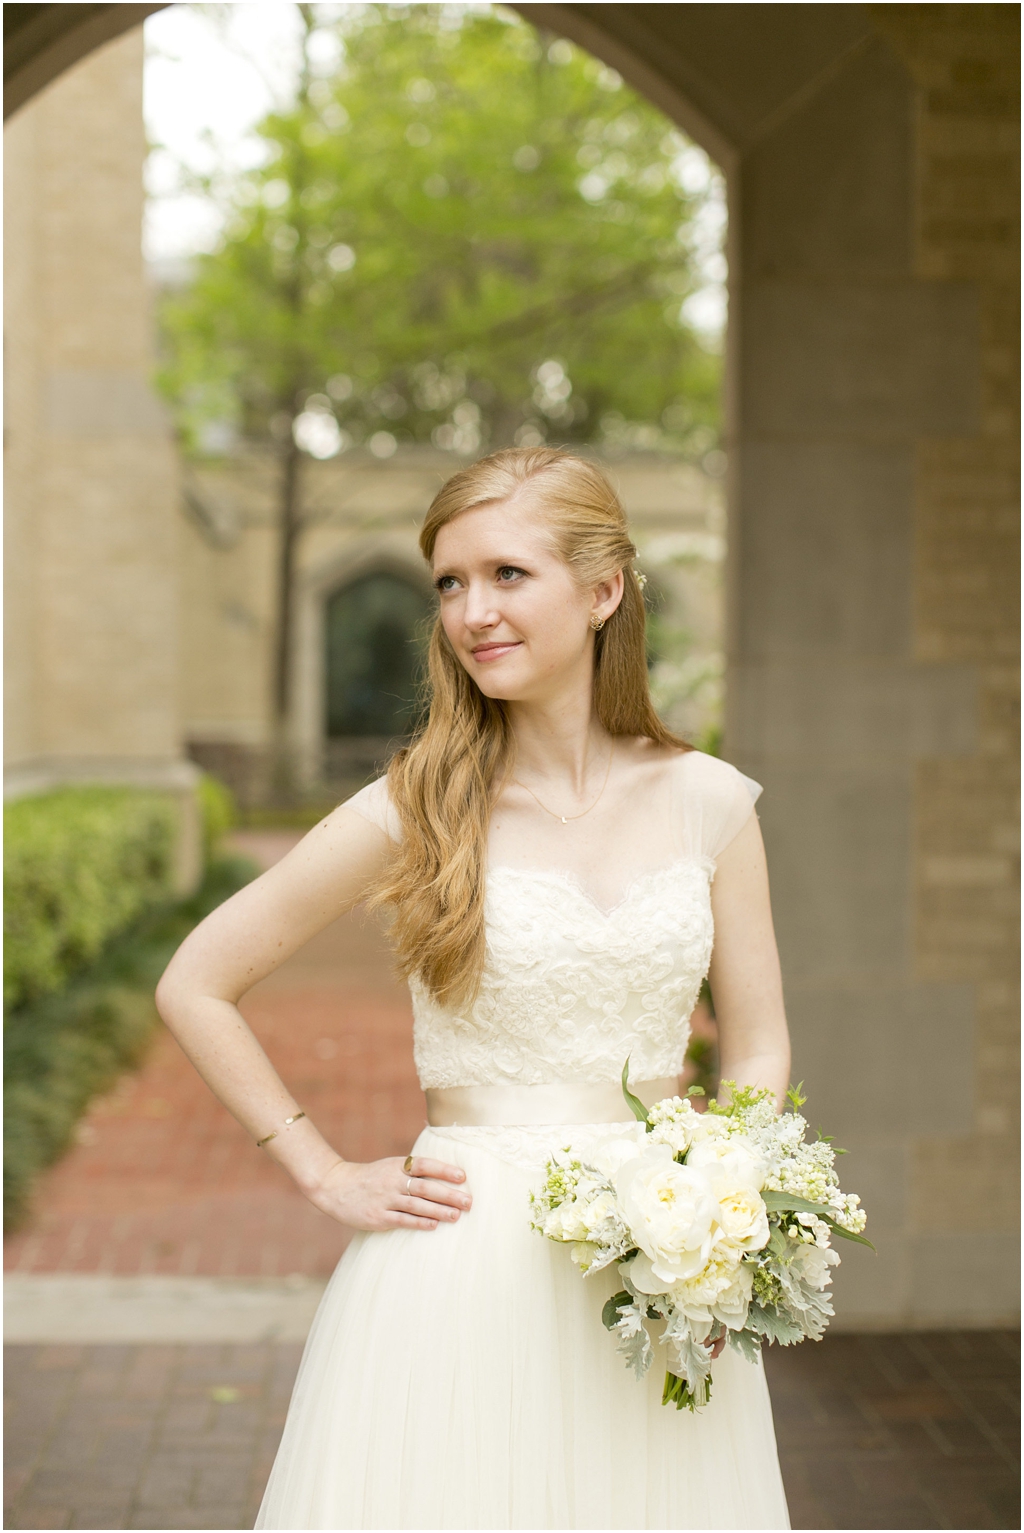 View More: http://maryfieldsphotography.pass.us/peters-wedding-6714